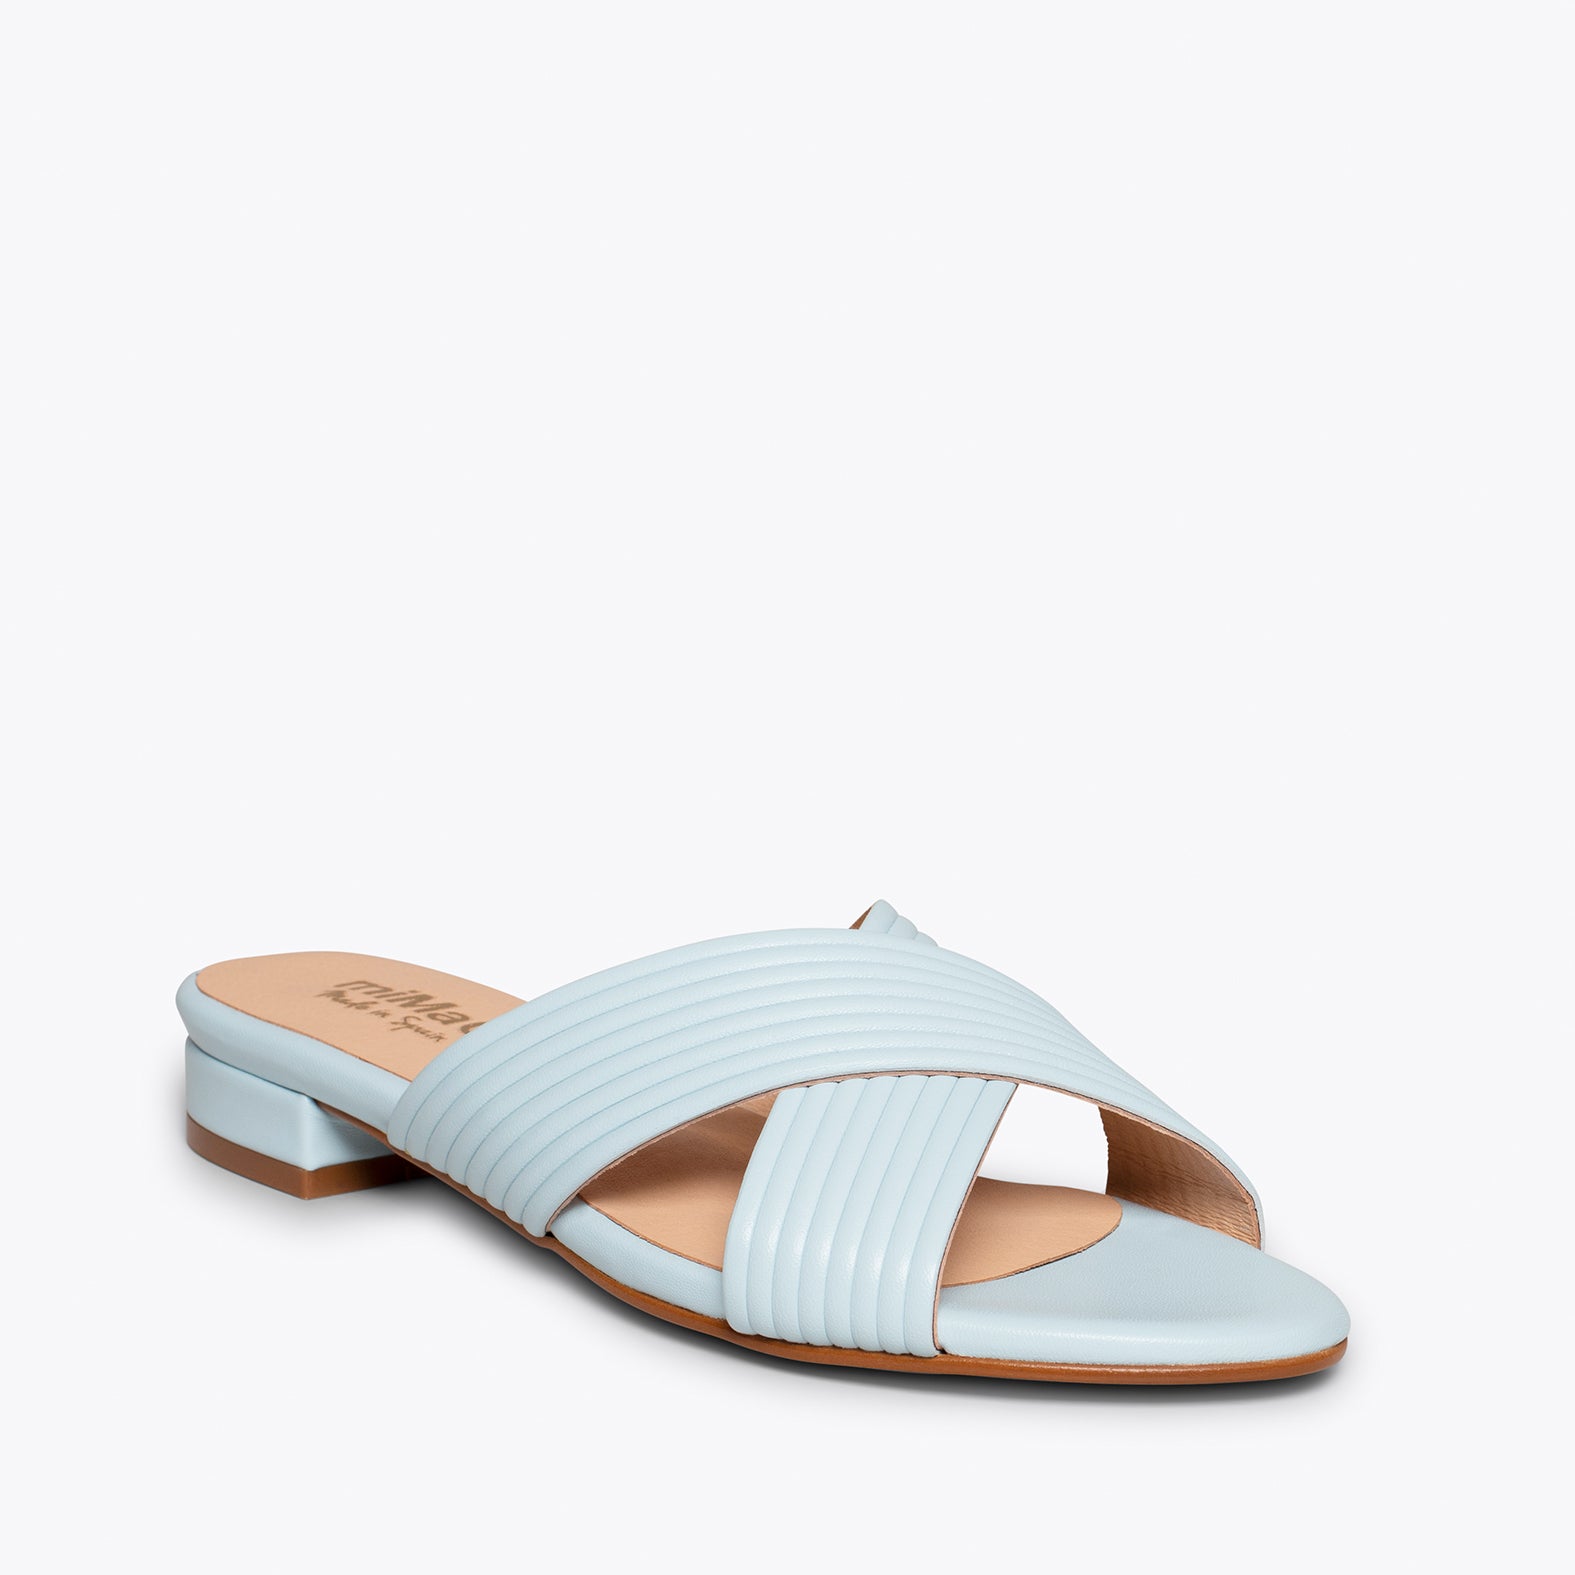 PALA – BLUE flat mules with cross straps